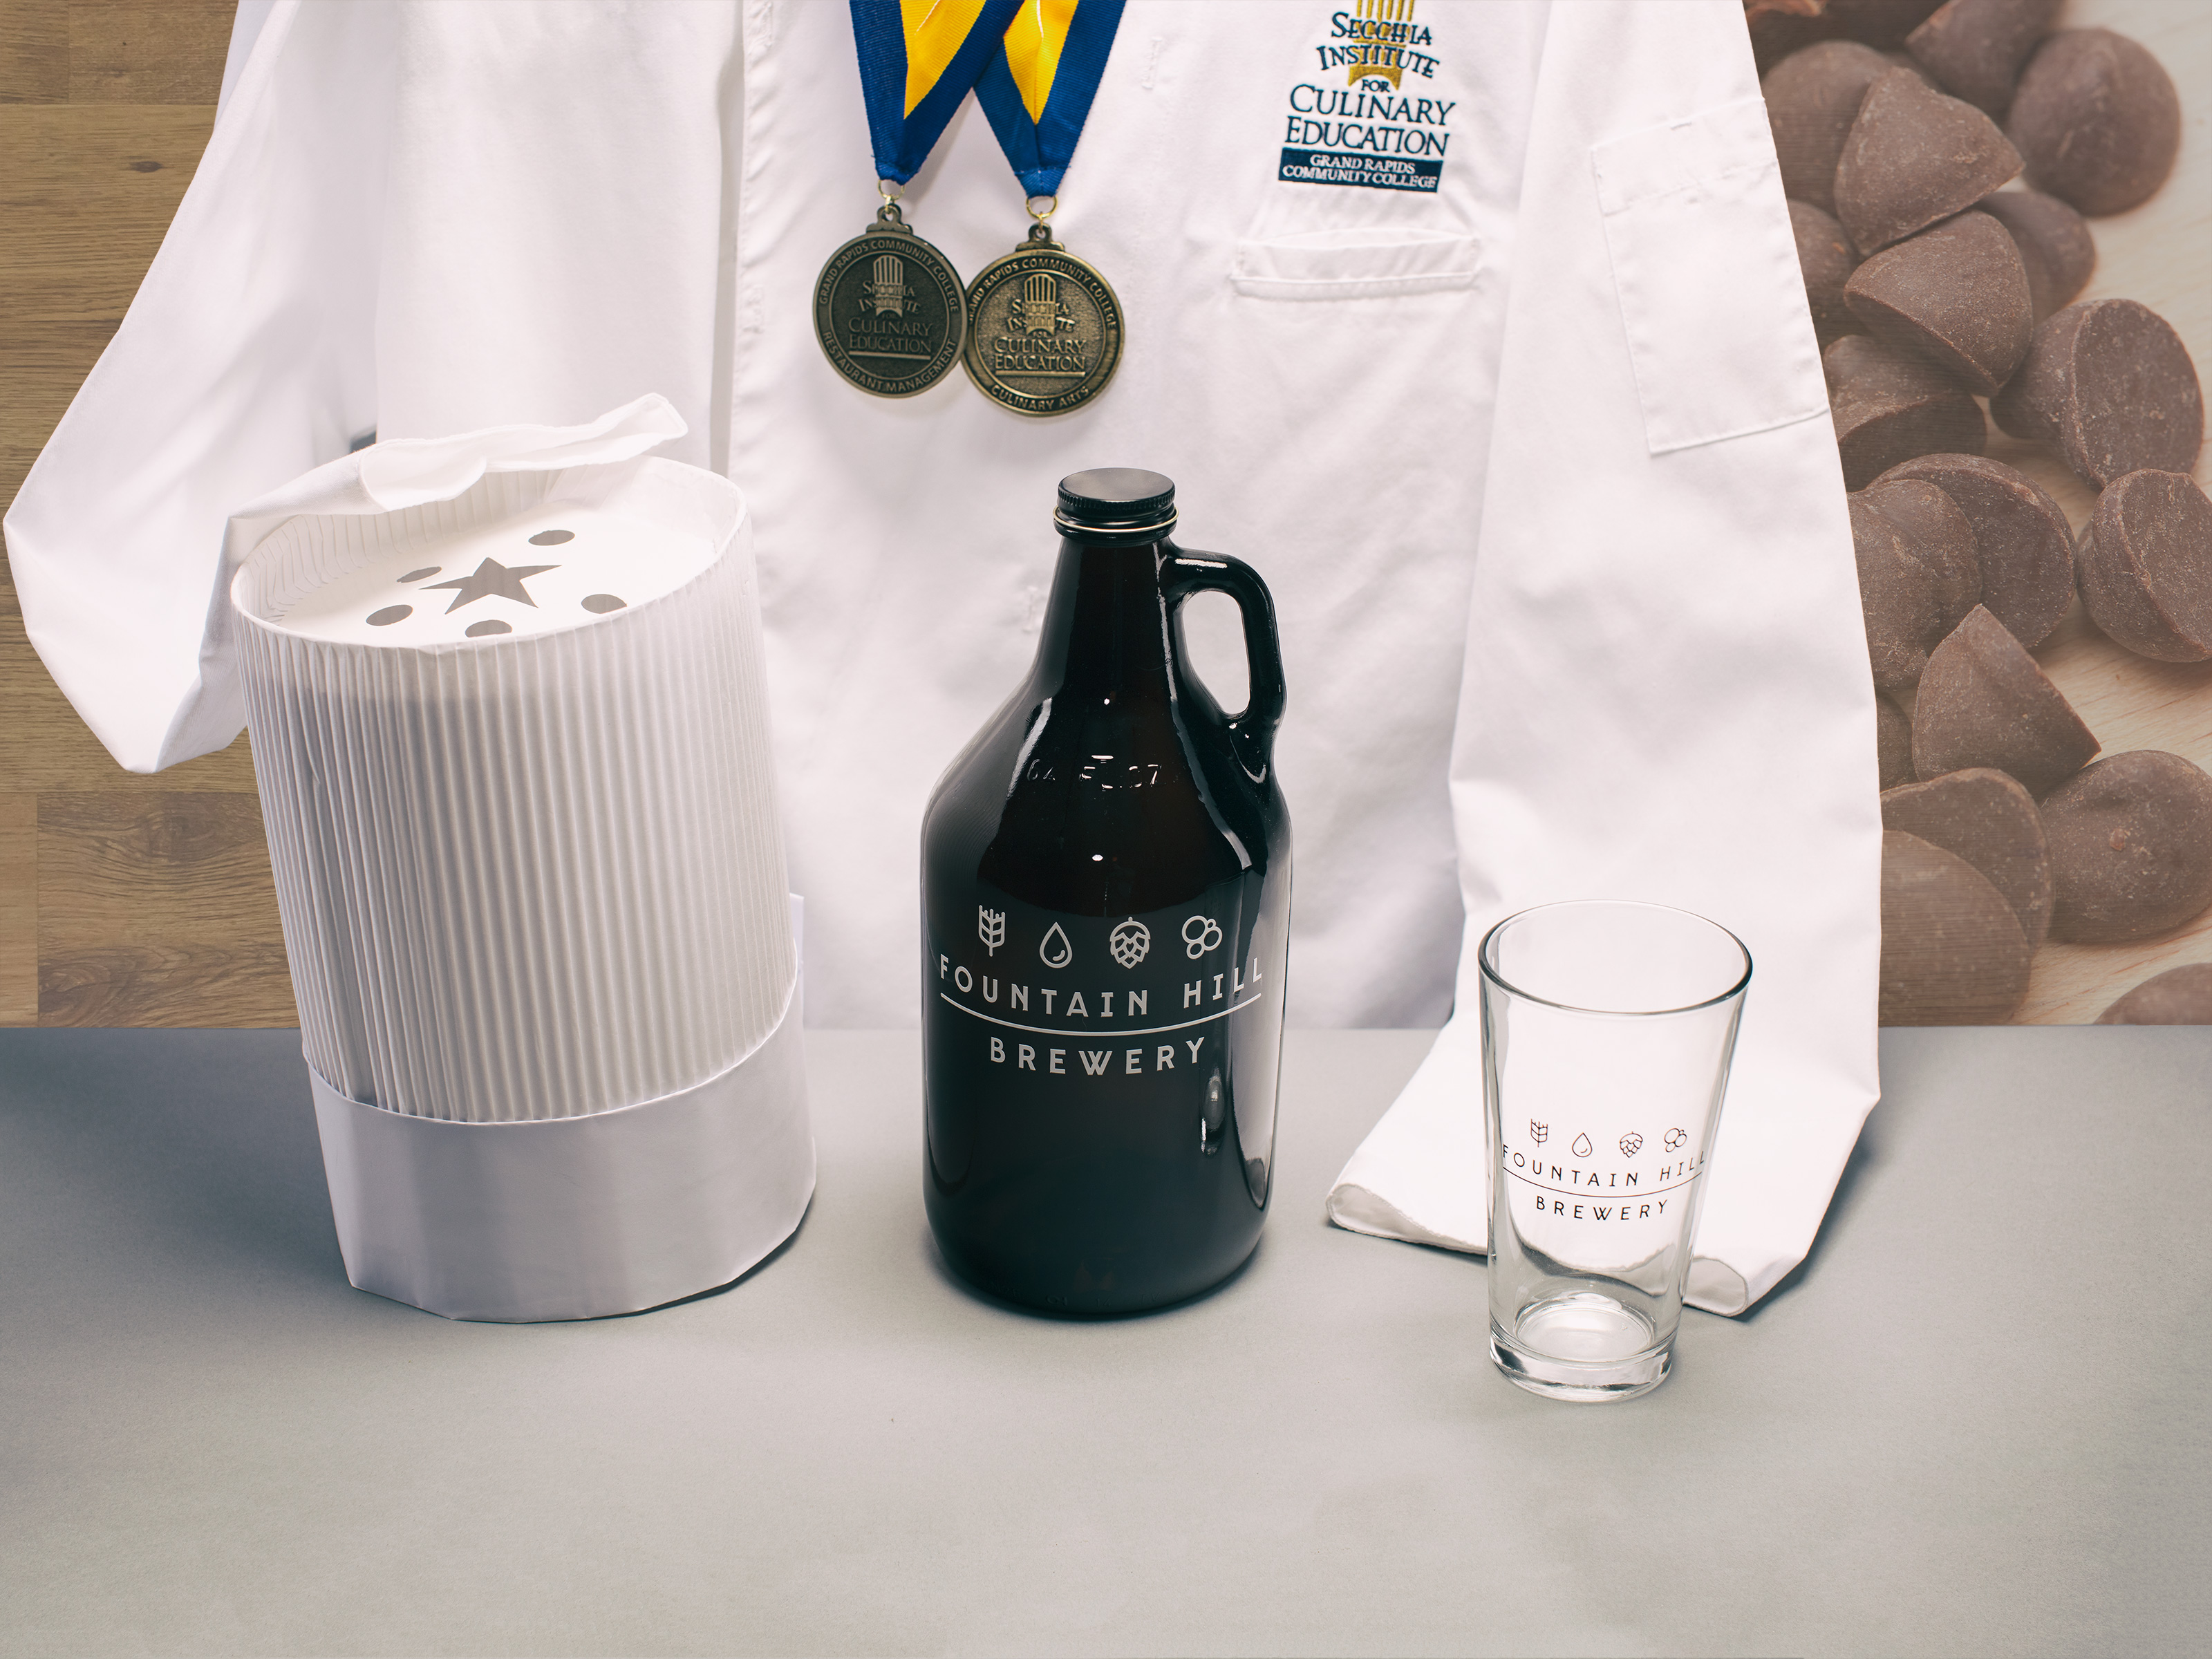 Culinary Arts, Hospitality, and Brewing Concentration Pathway